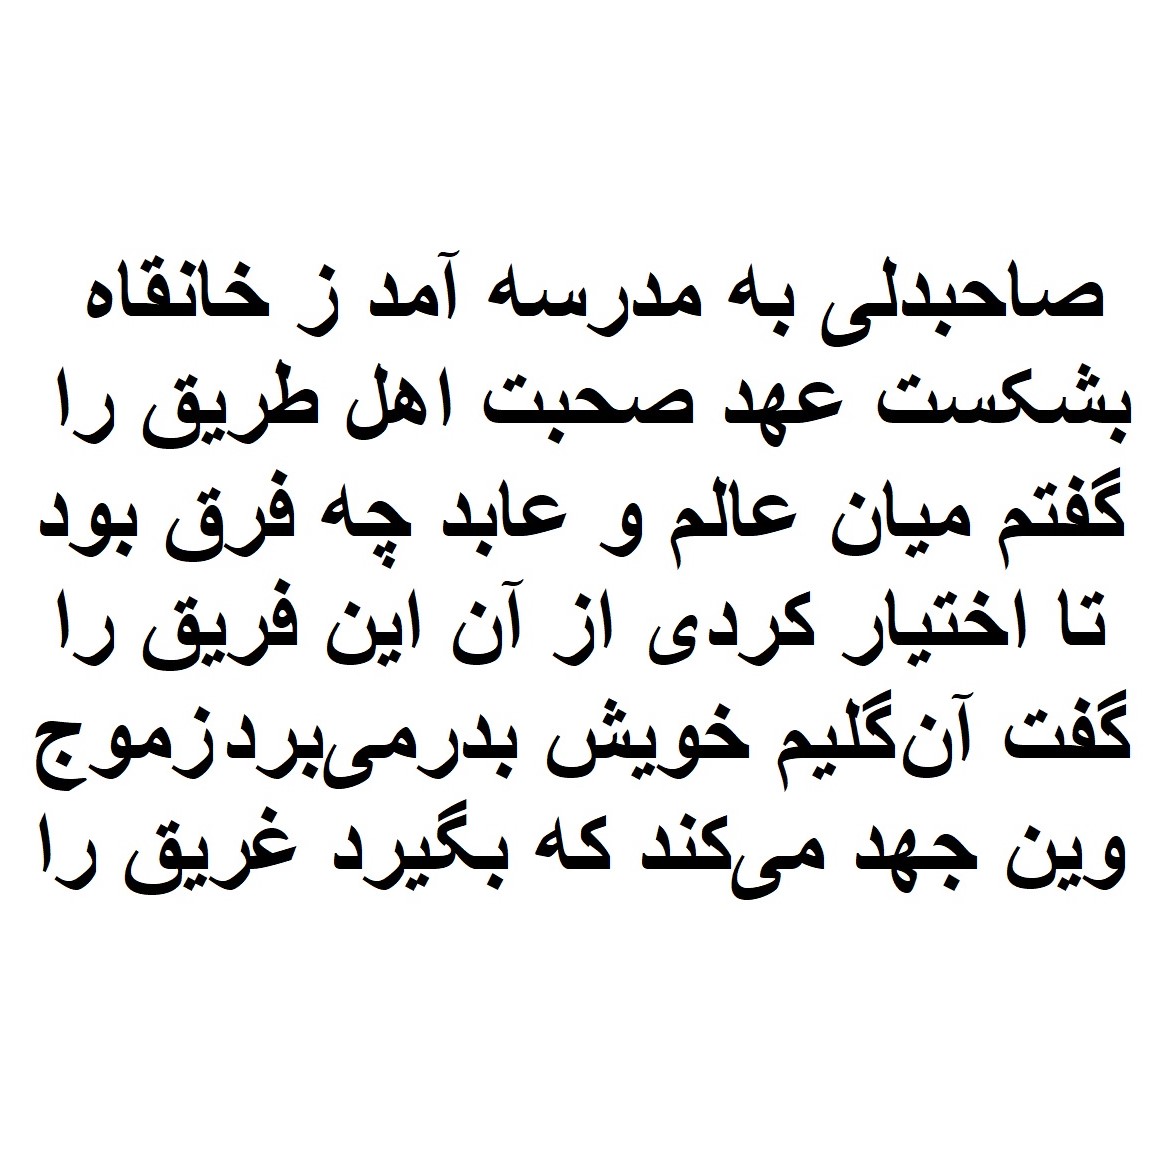 Persian poetry: Sa'adi had this to say about the difference between a preacher and a teacher